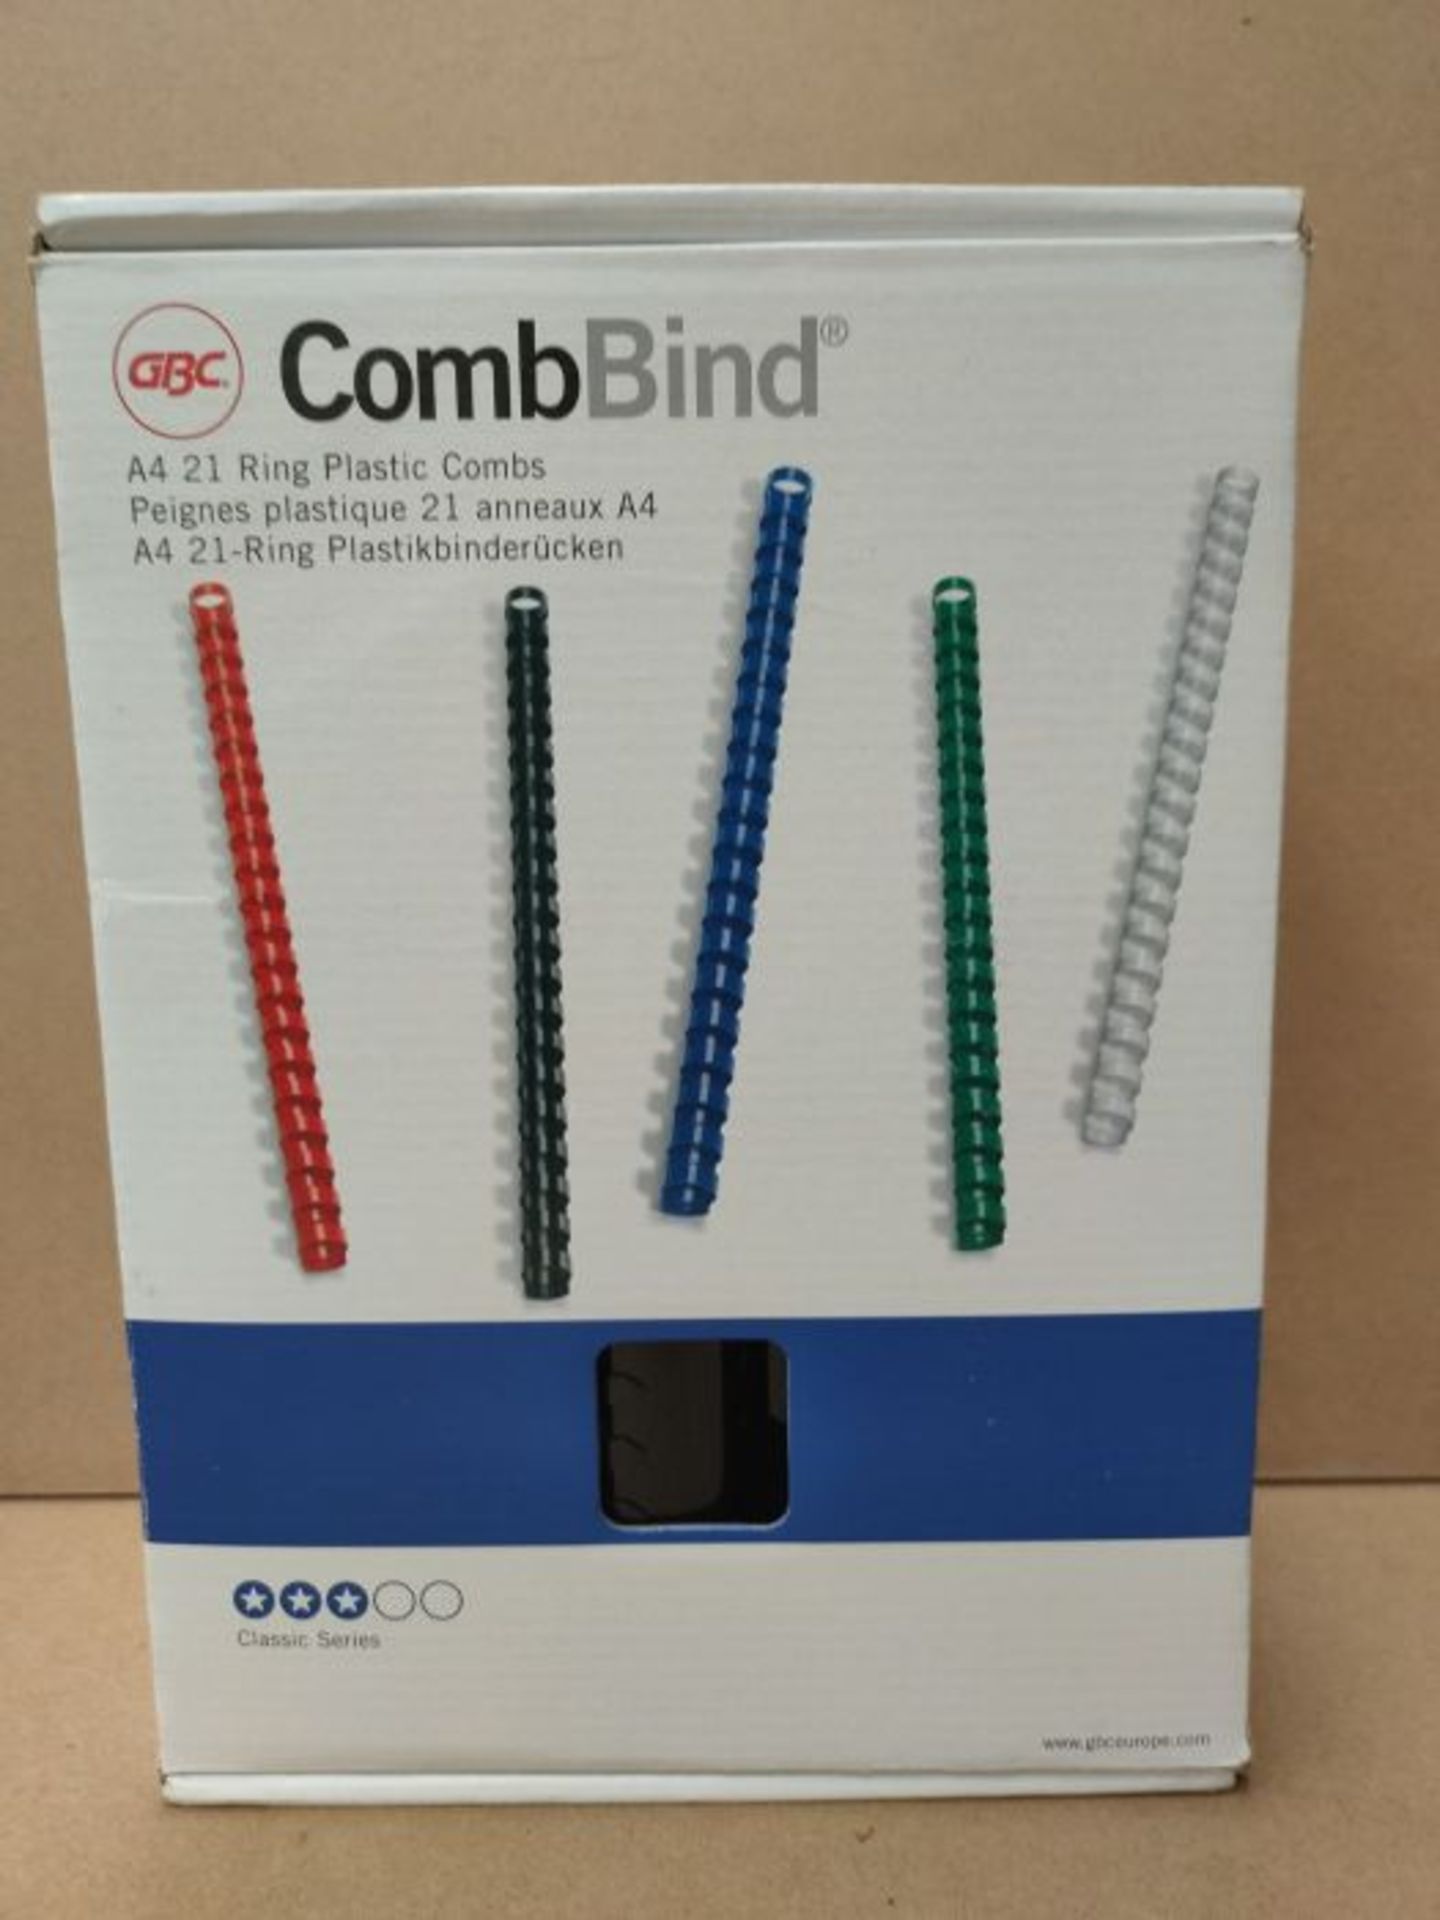 GBC CombBind Binding Combs, 38 mm, 330 Sheet Capacity, A4, 21 Ring, Black, Pack of 50, - Image 2 of 6